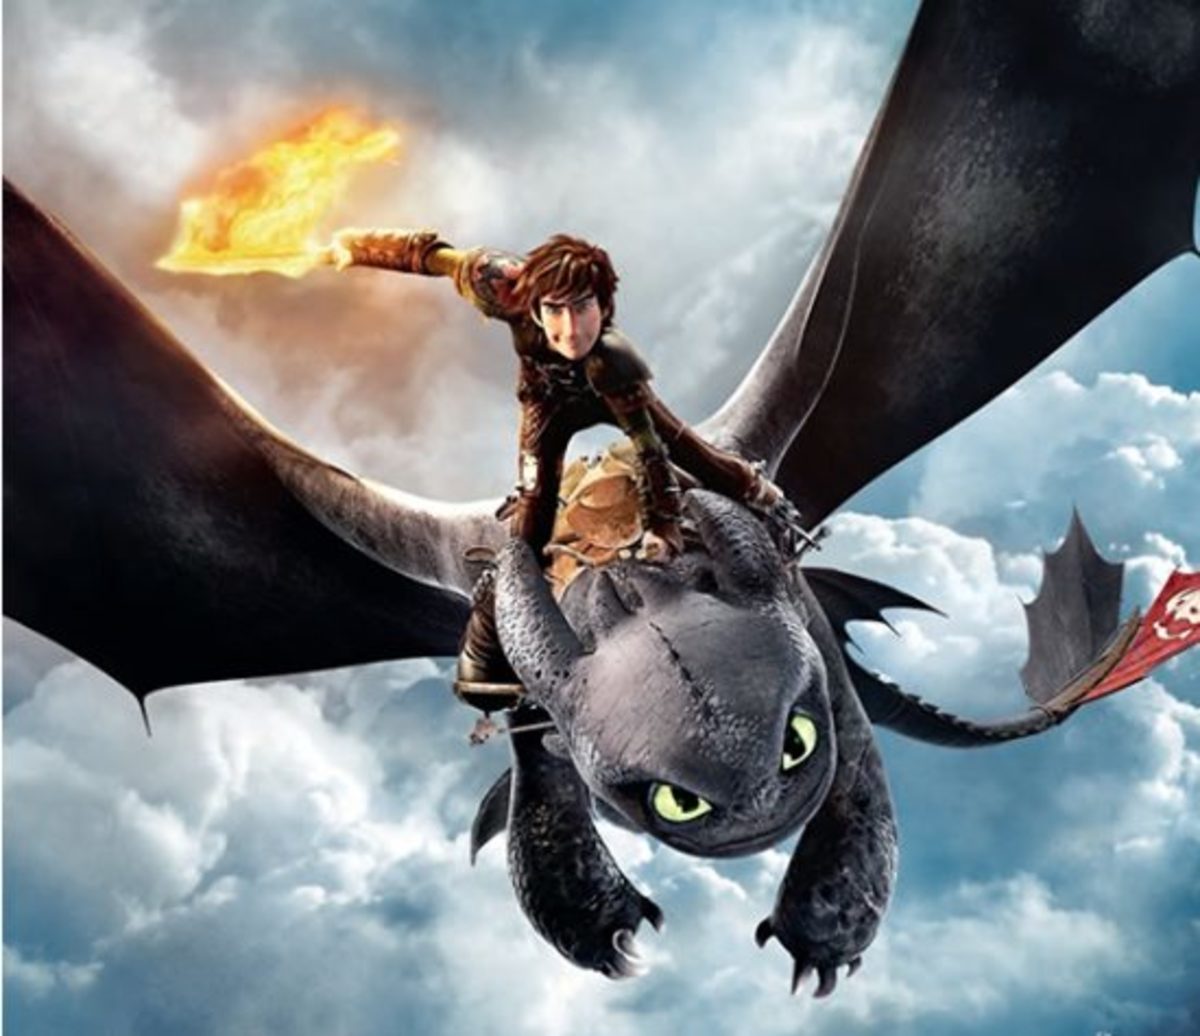 From Dreamwork's How to Train Your Dragon 2